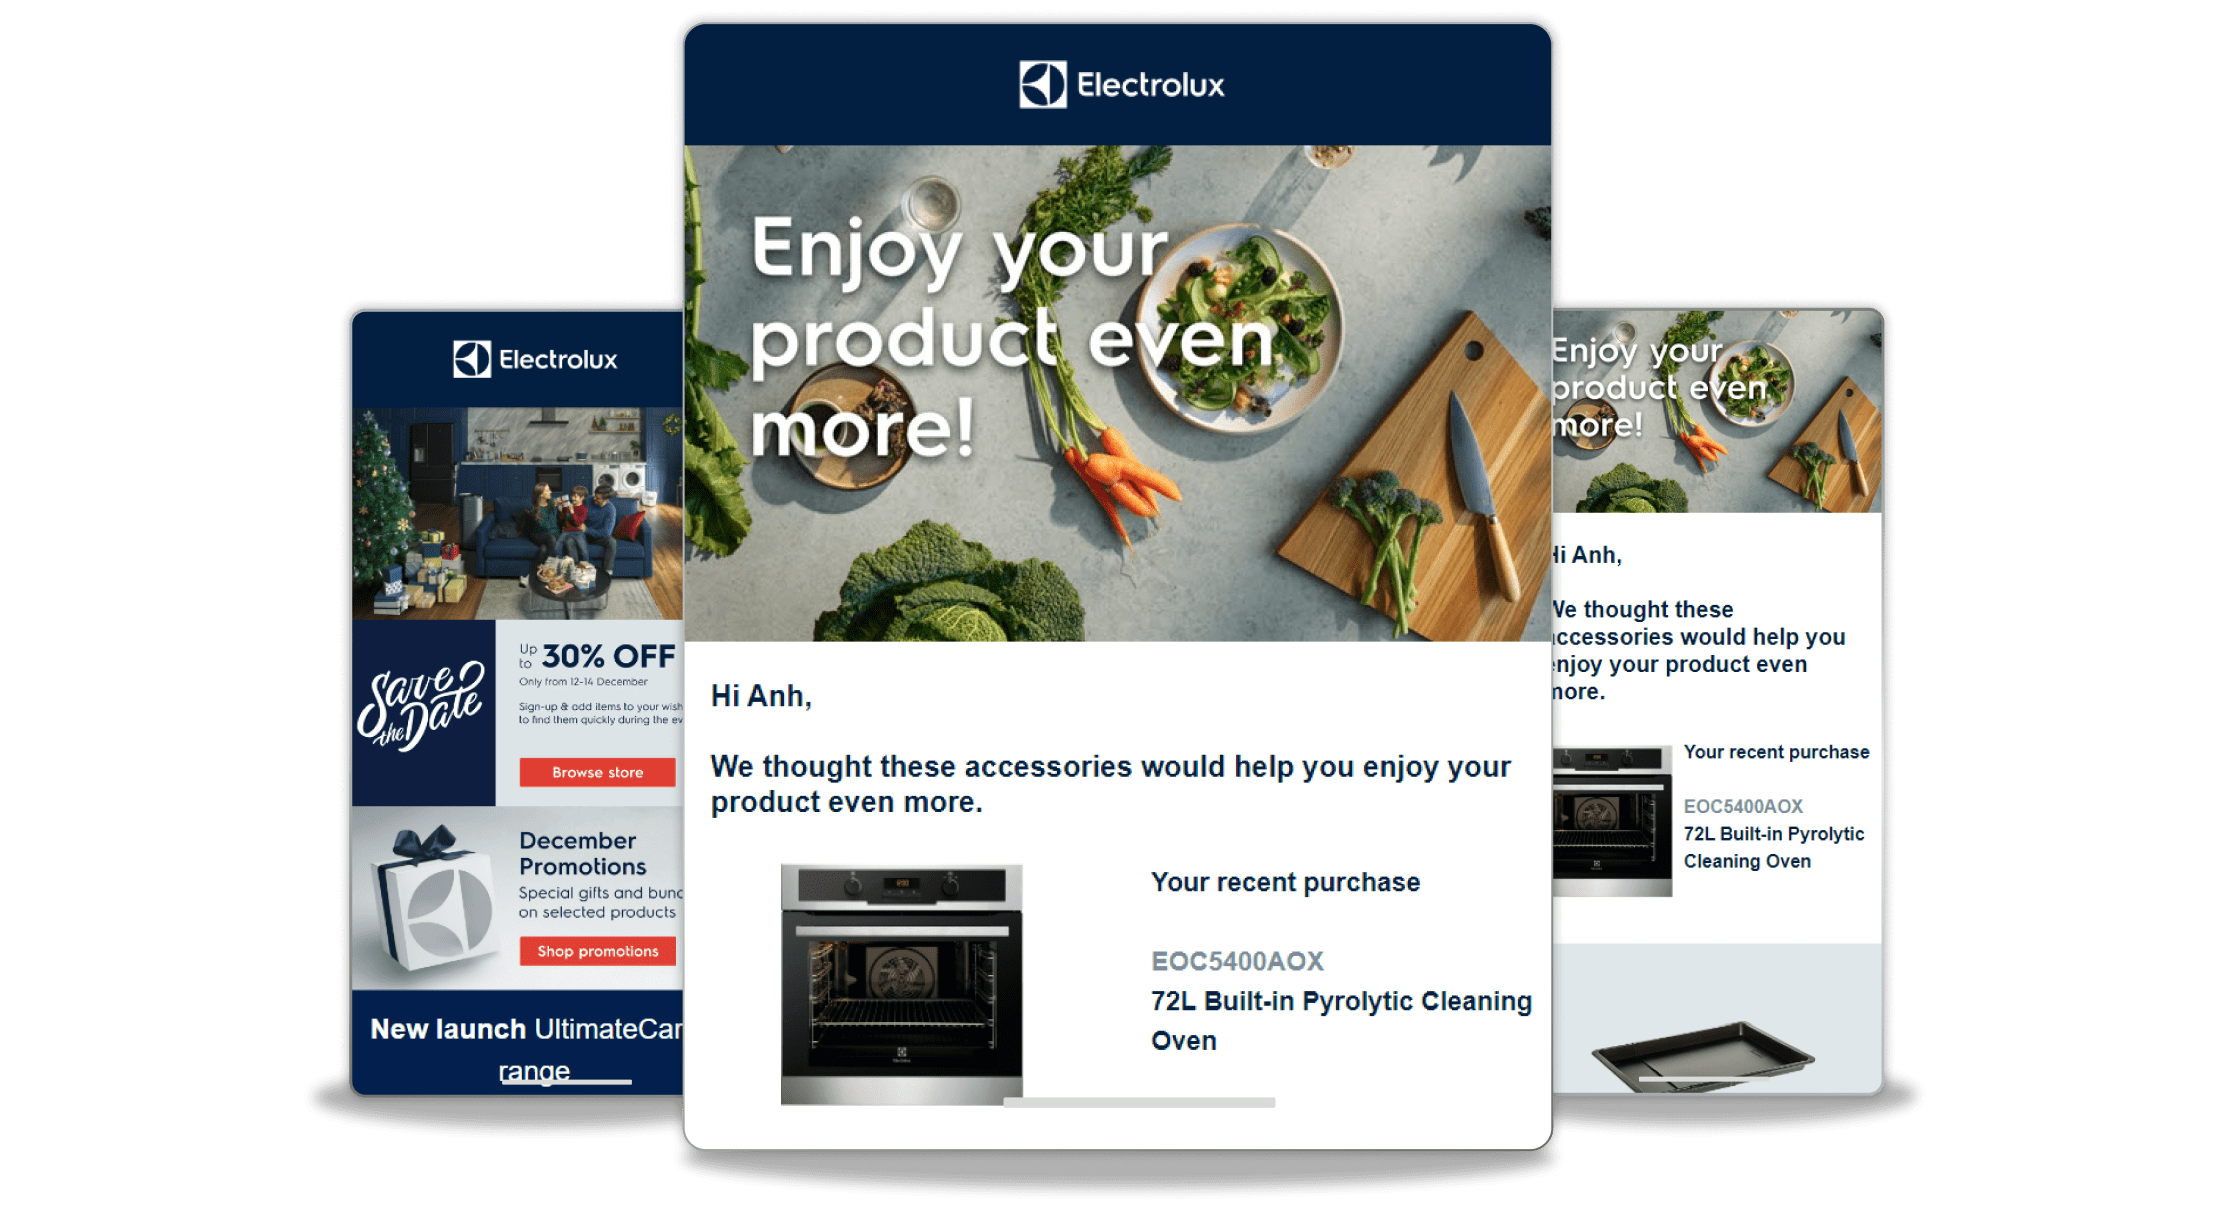 Powering Electrolux’s email marketing in the APAC and MEA regions 